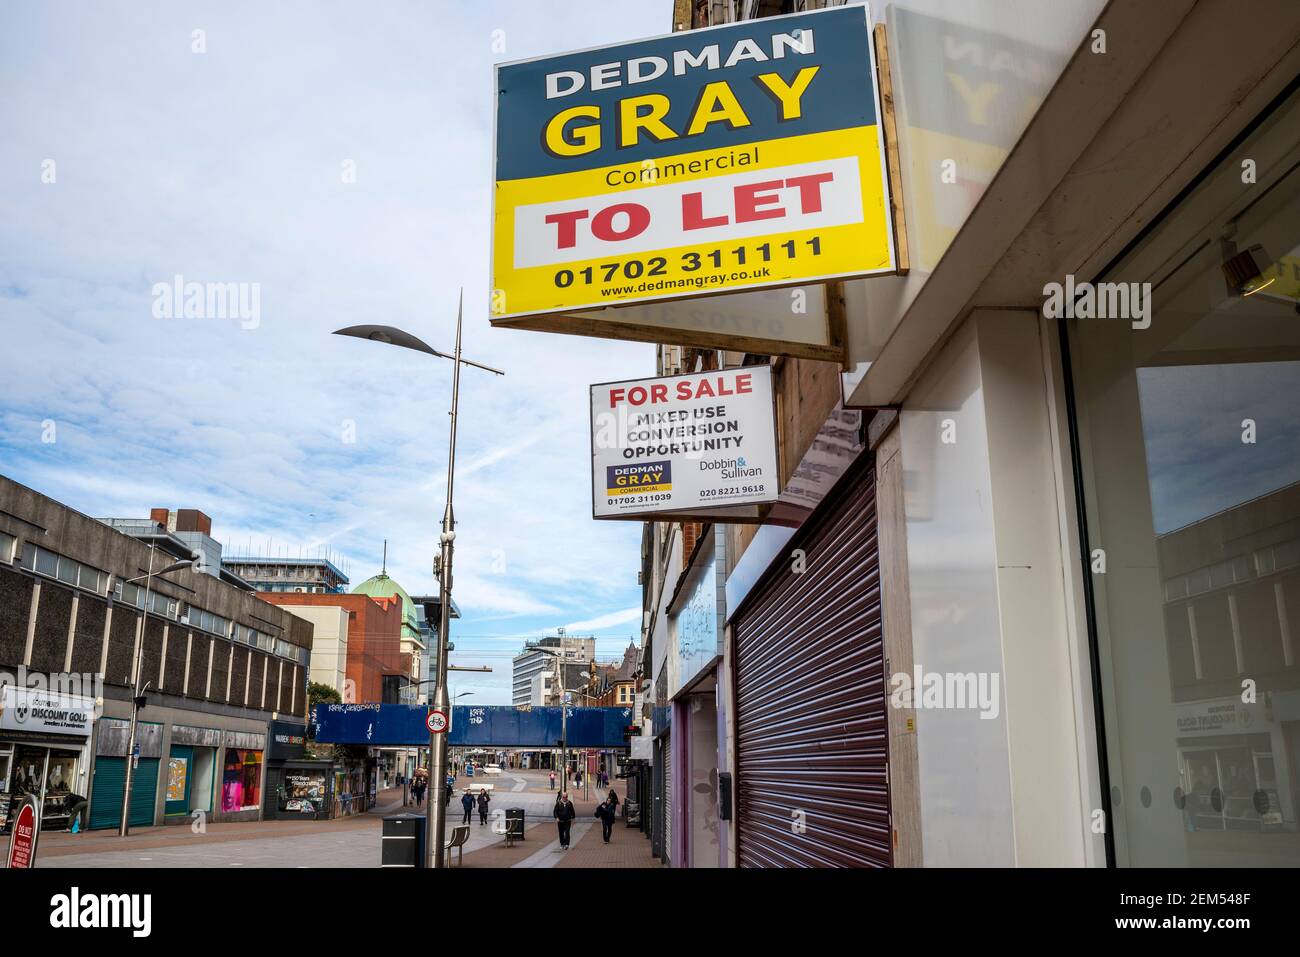 Closed and decaying shops, stores, in High Street, Southend on Sea, Essex, UK, during COVID 19, Coronavirus third lockdown. Lost retail. To let sign Stock Photo